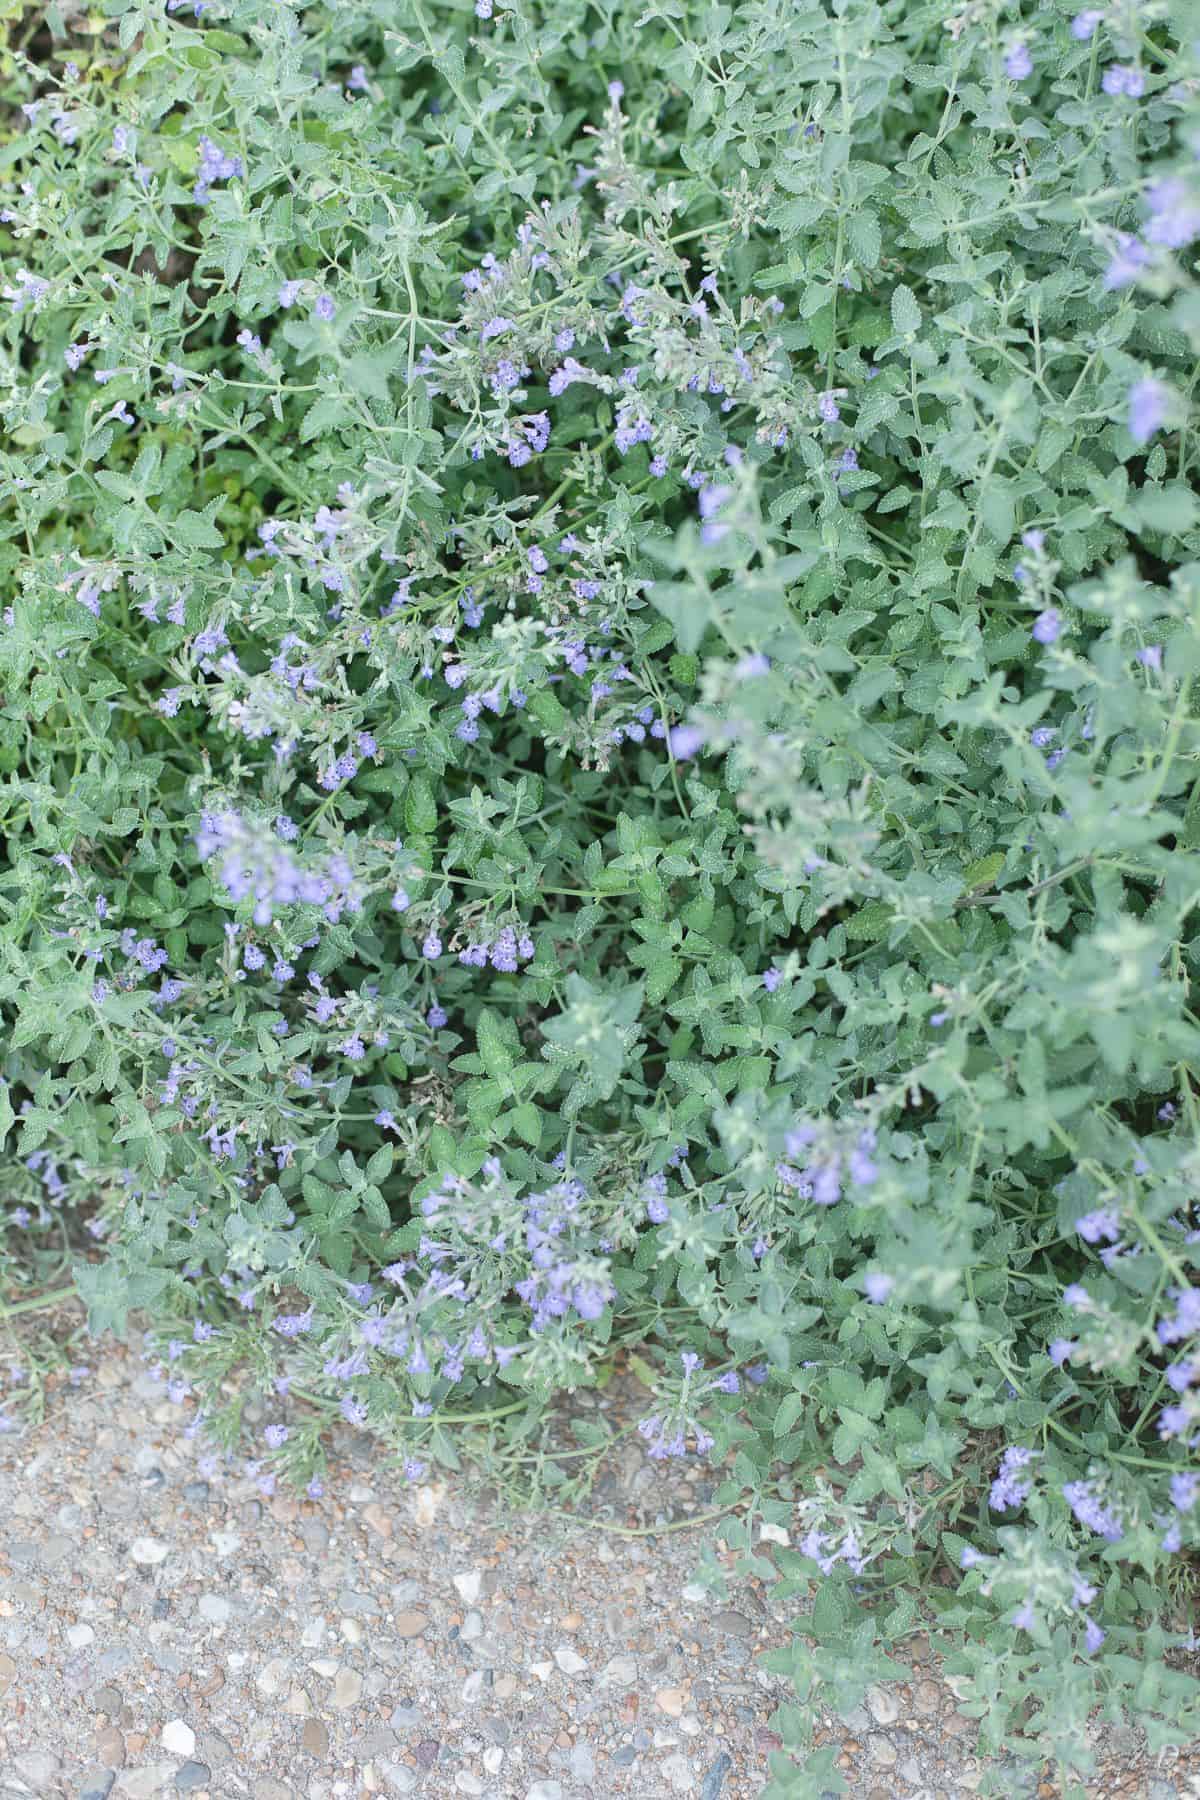 A bush of catmint next to a pebbled sidewalk.